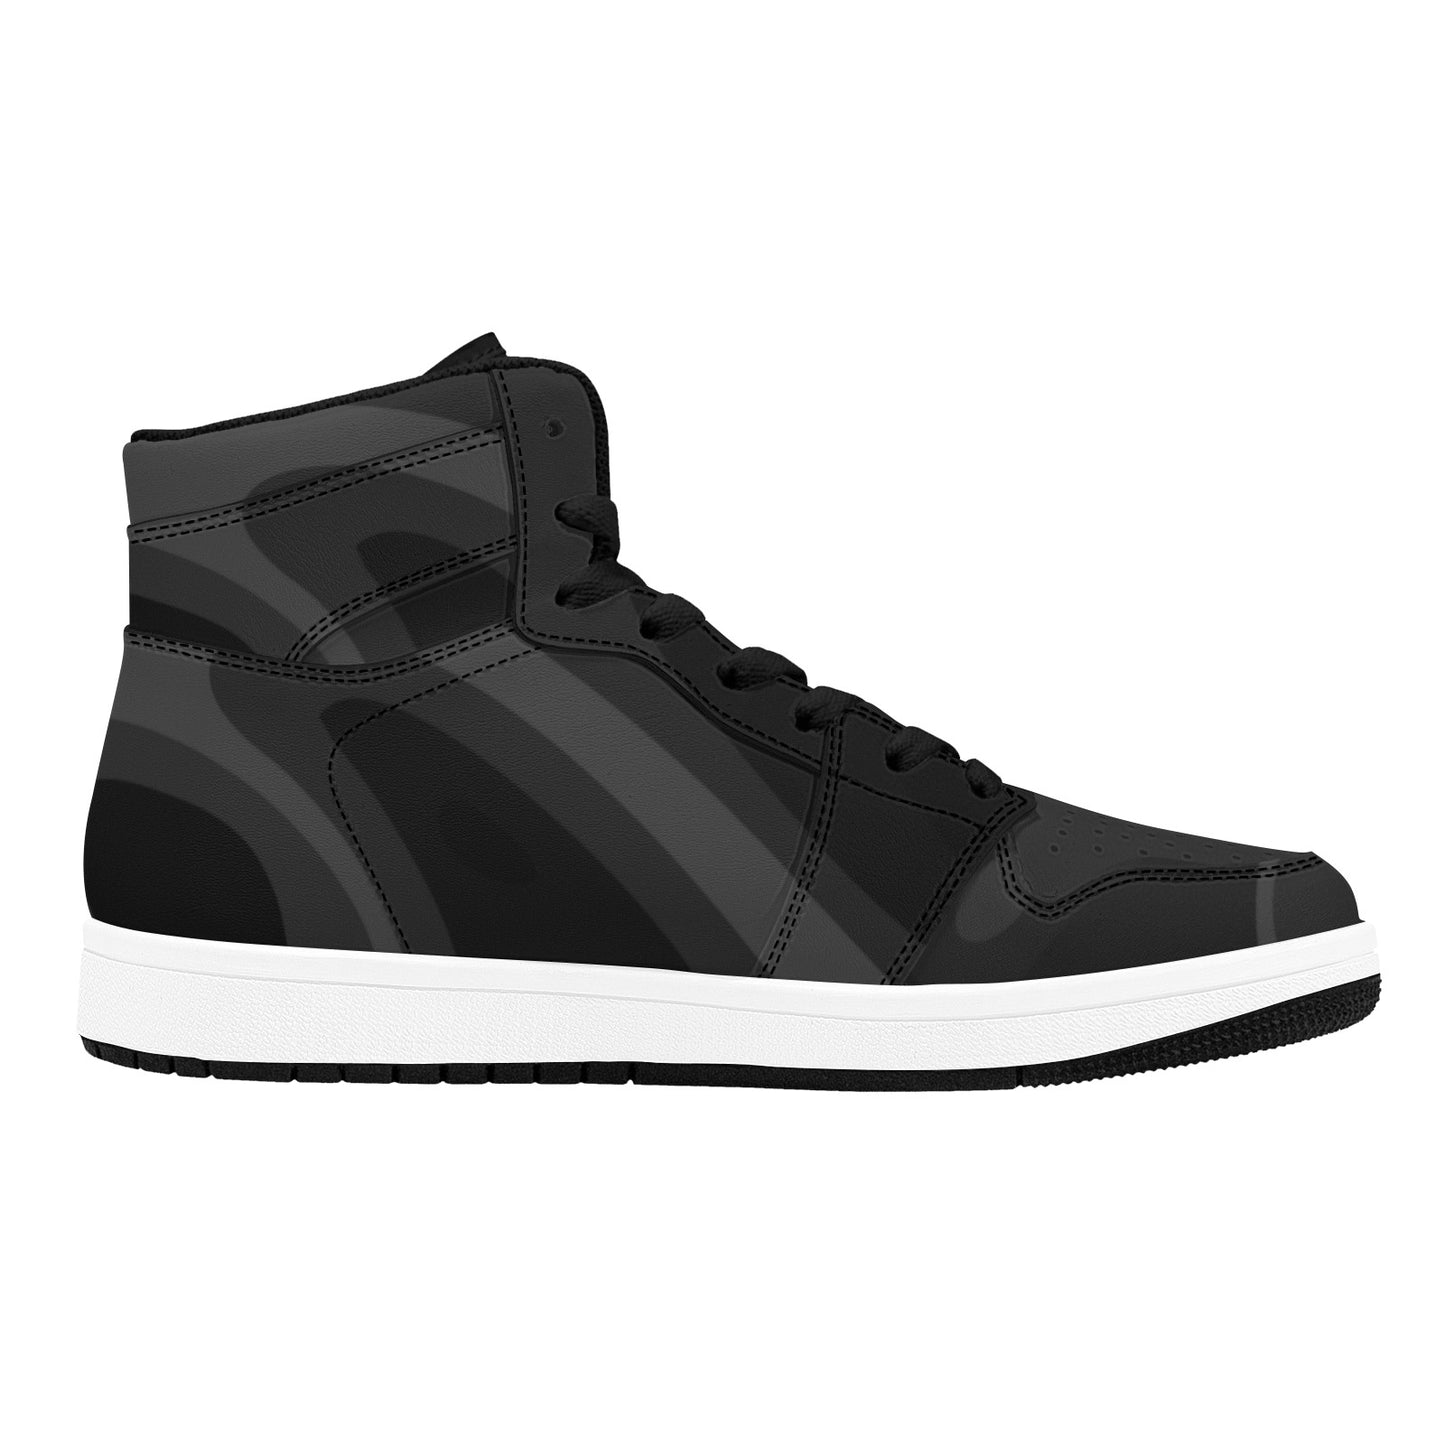 Black High Top Sneakers Abstract Black Pattern High Top Sneakers Men High Top Sneakers